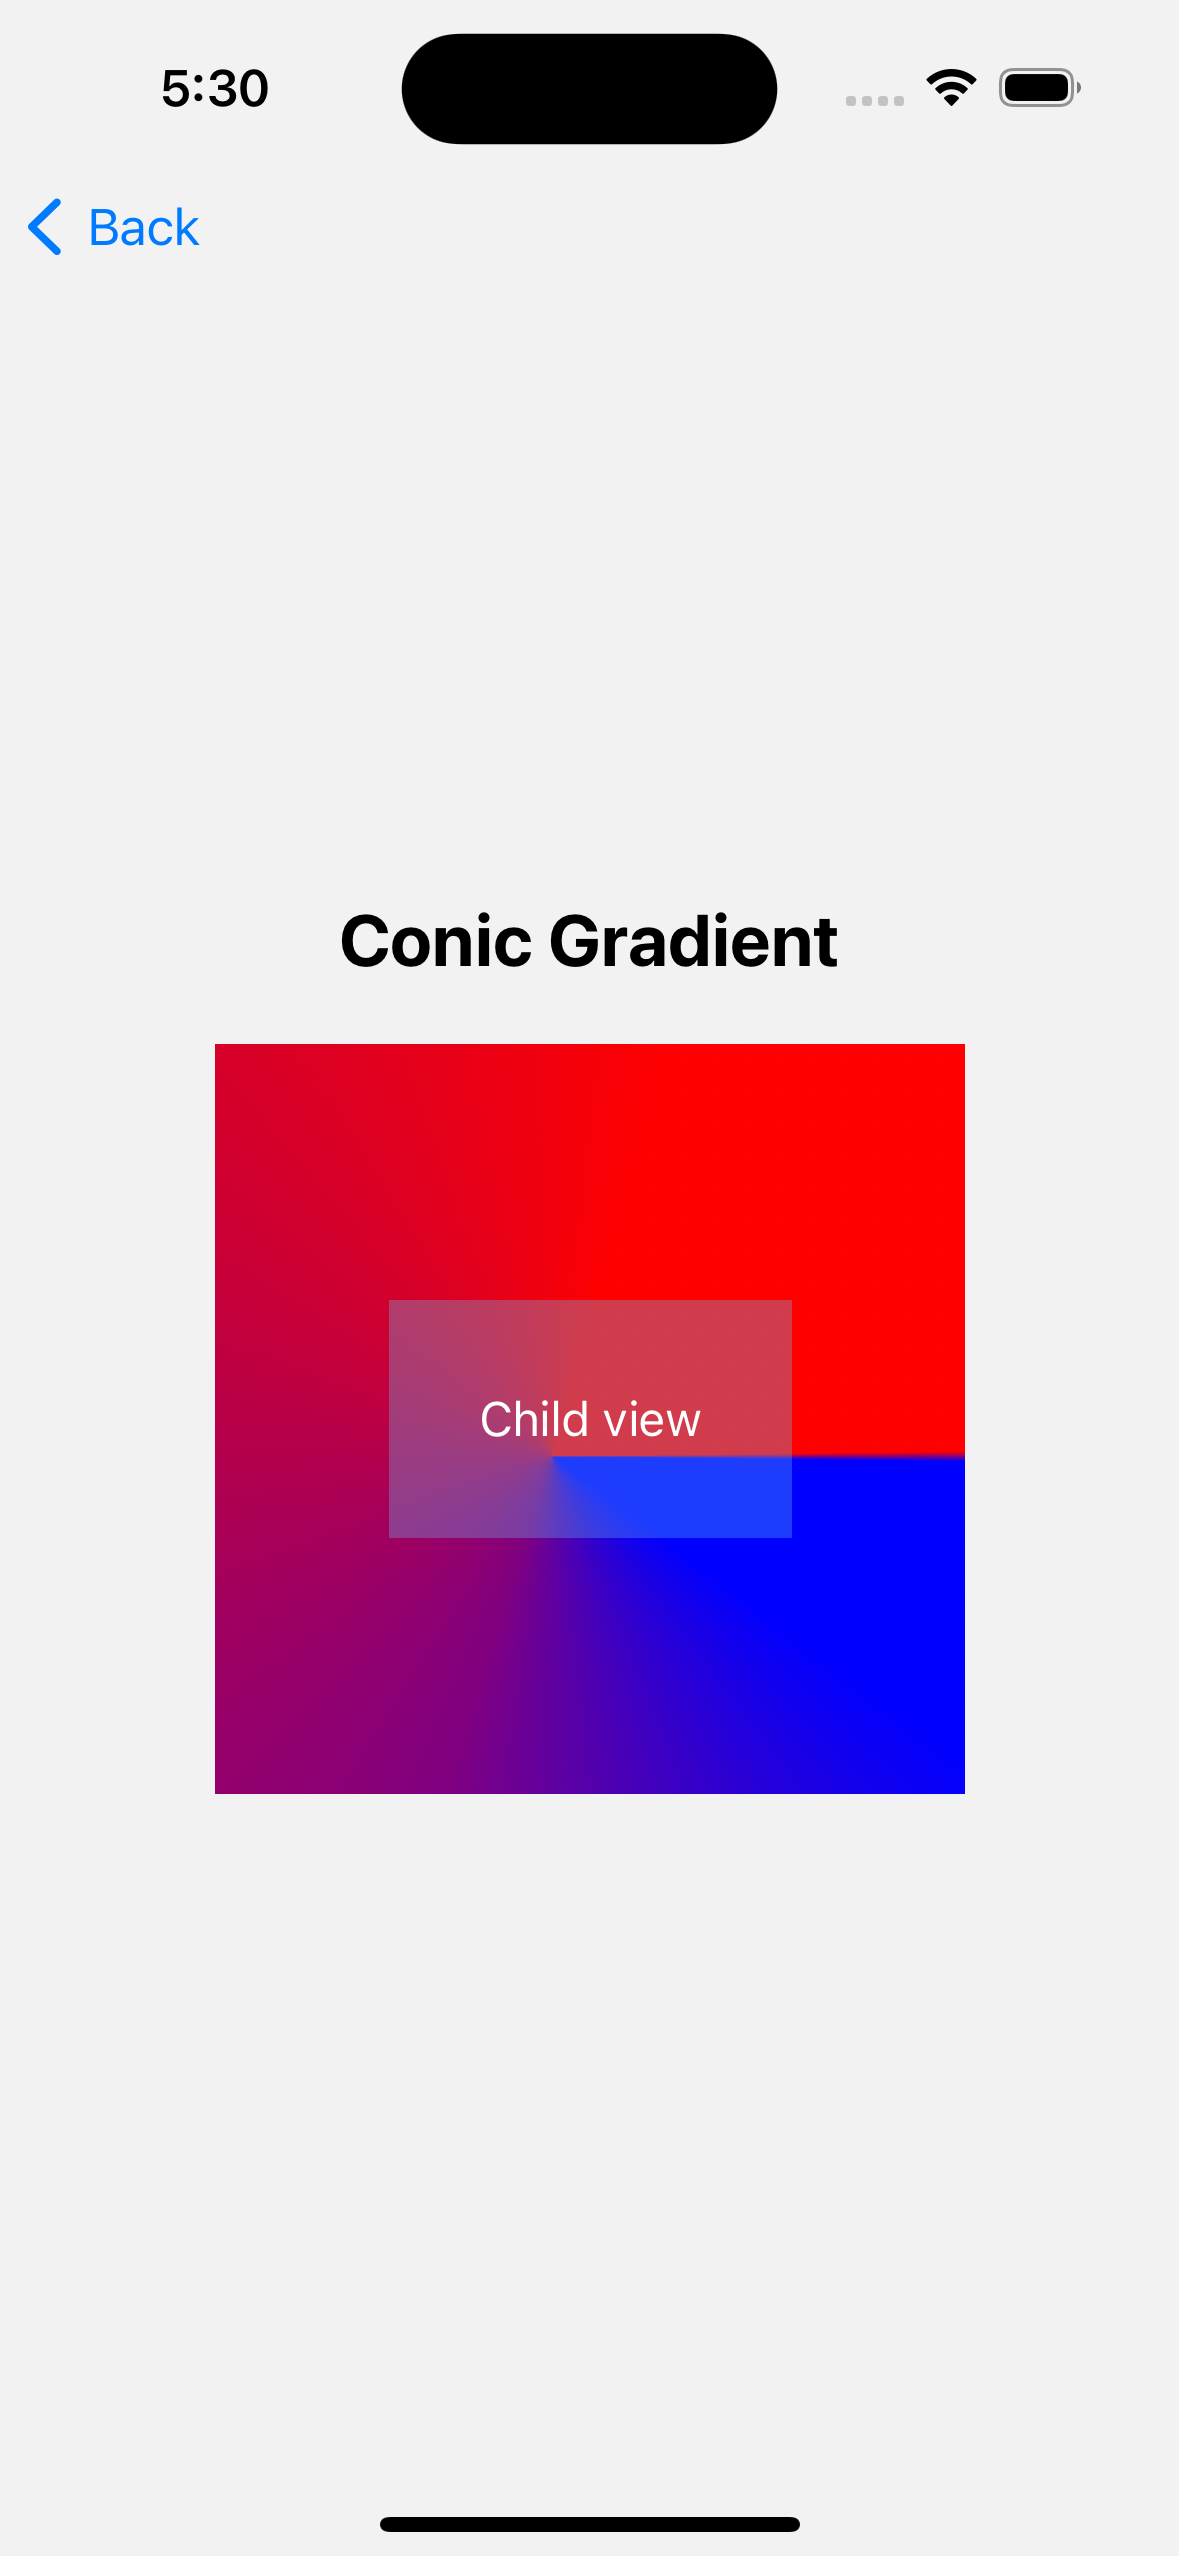 Conic gradient view in action